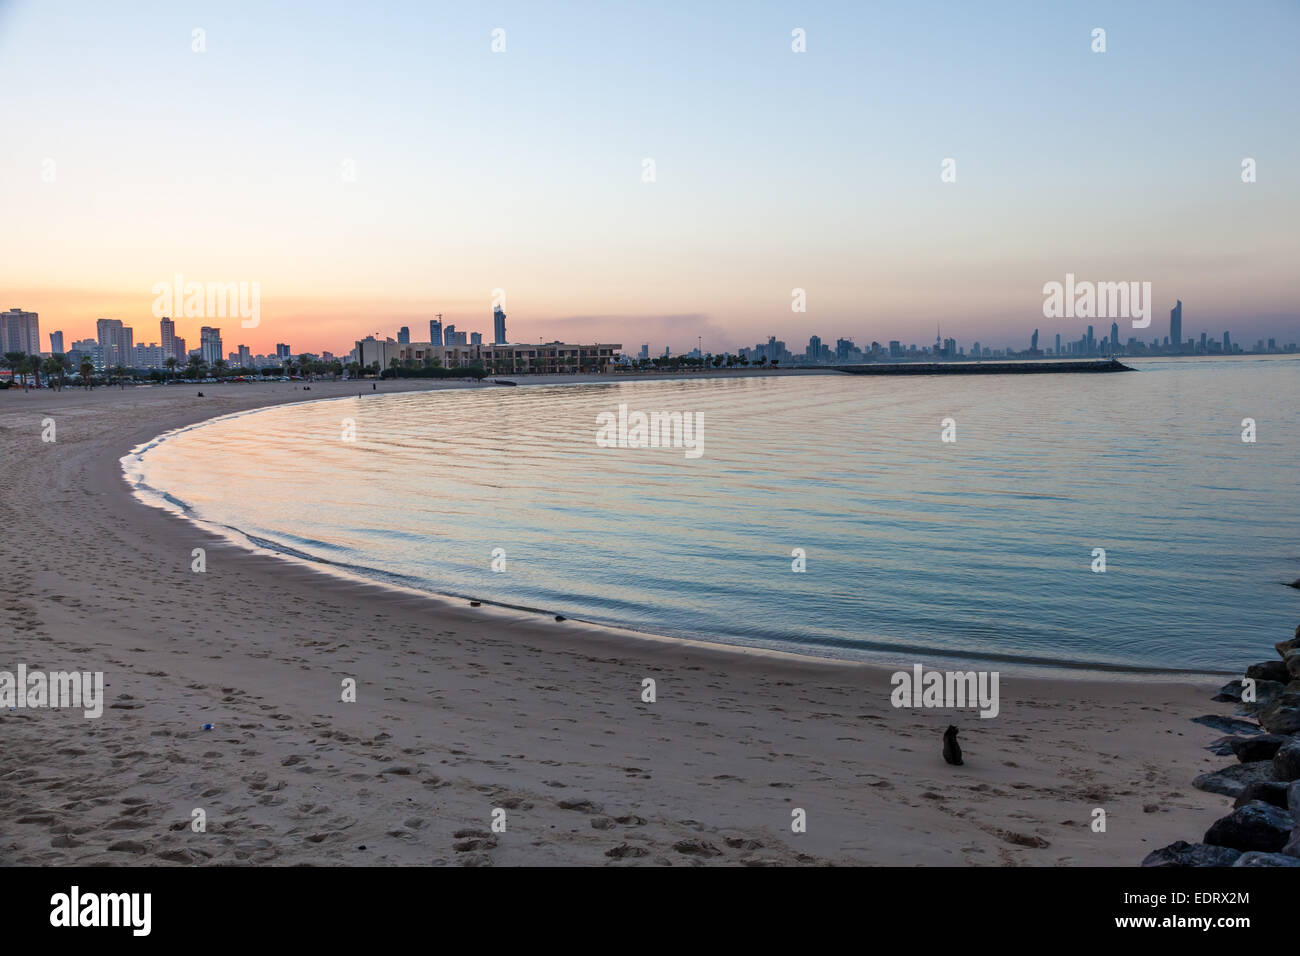 Marina Beach in Kuwait City, Middle East Stock Photo